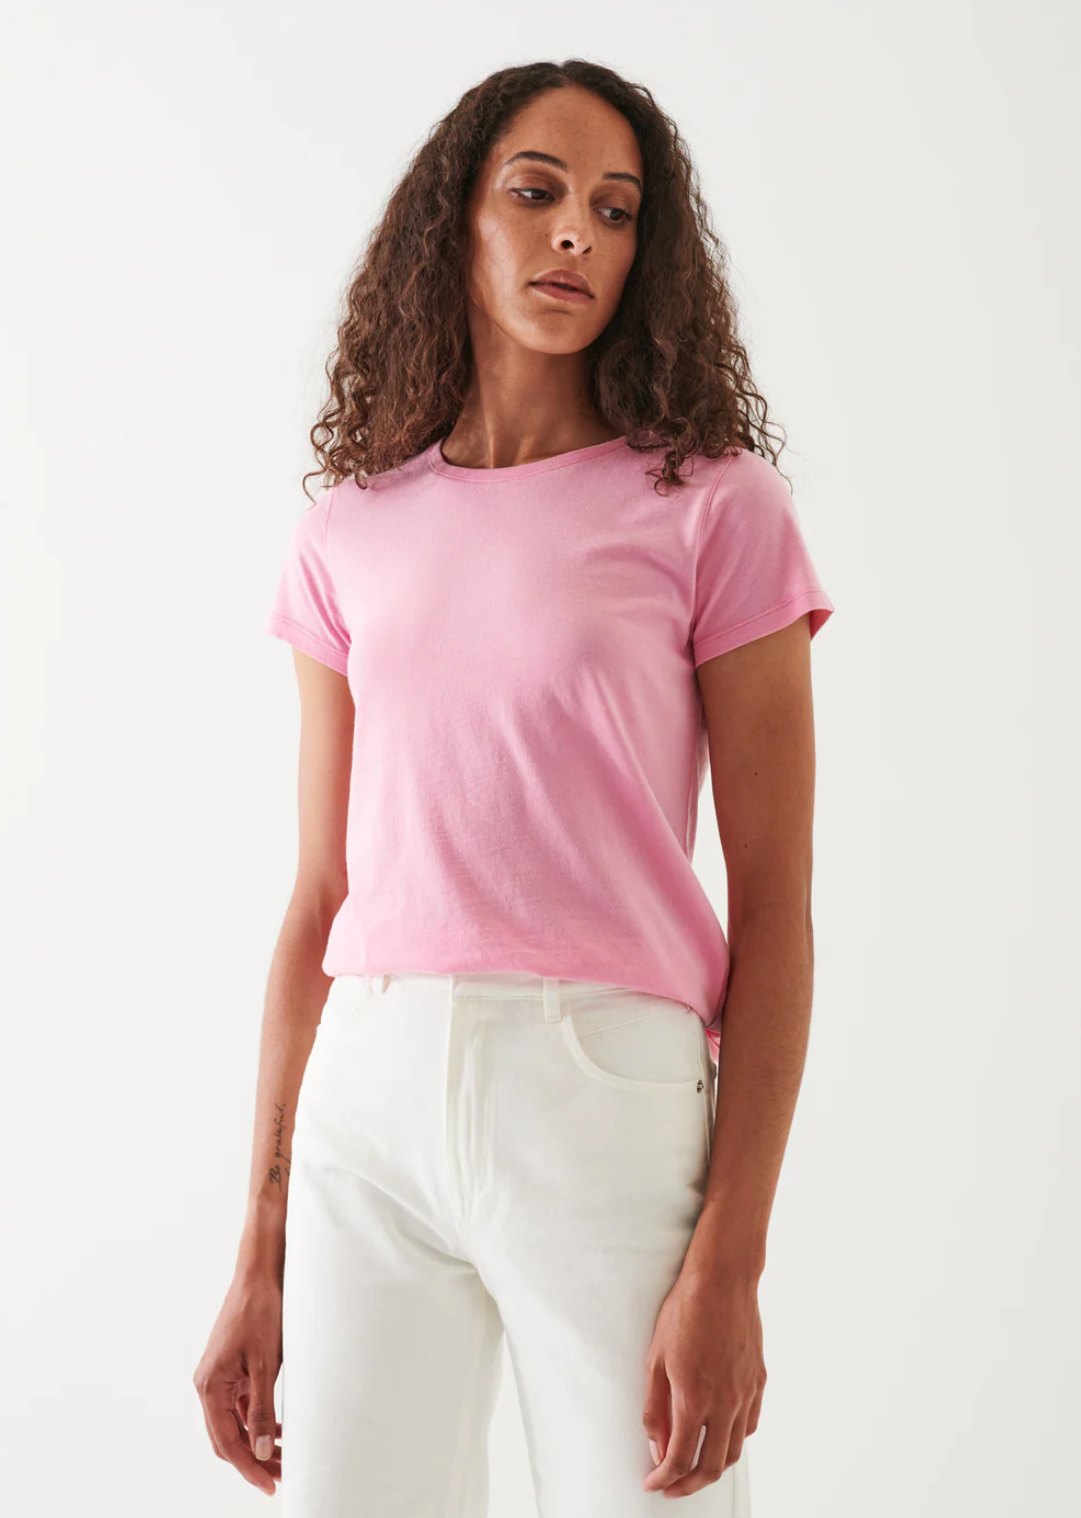 CLASSIC CREW TEE - Med. Pink